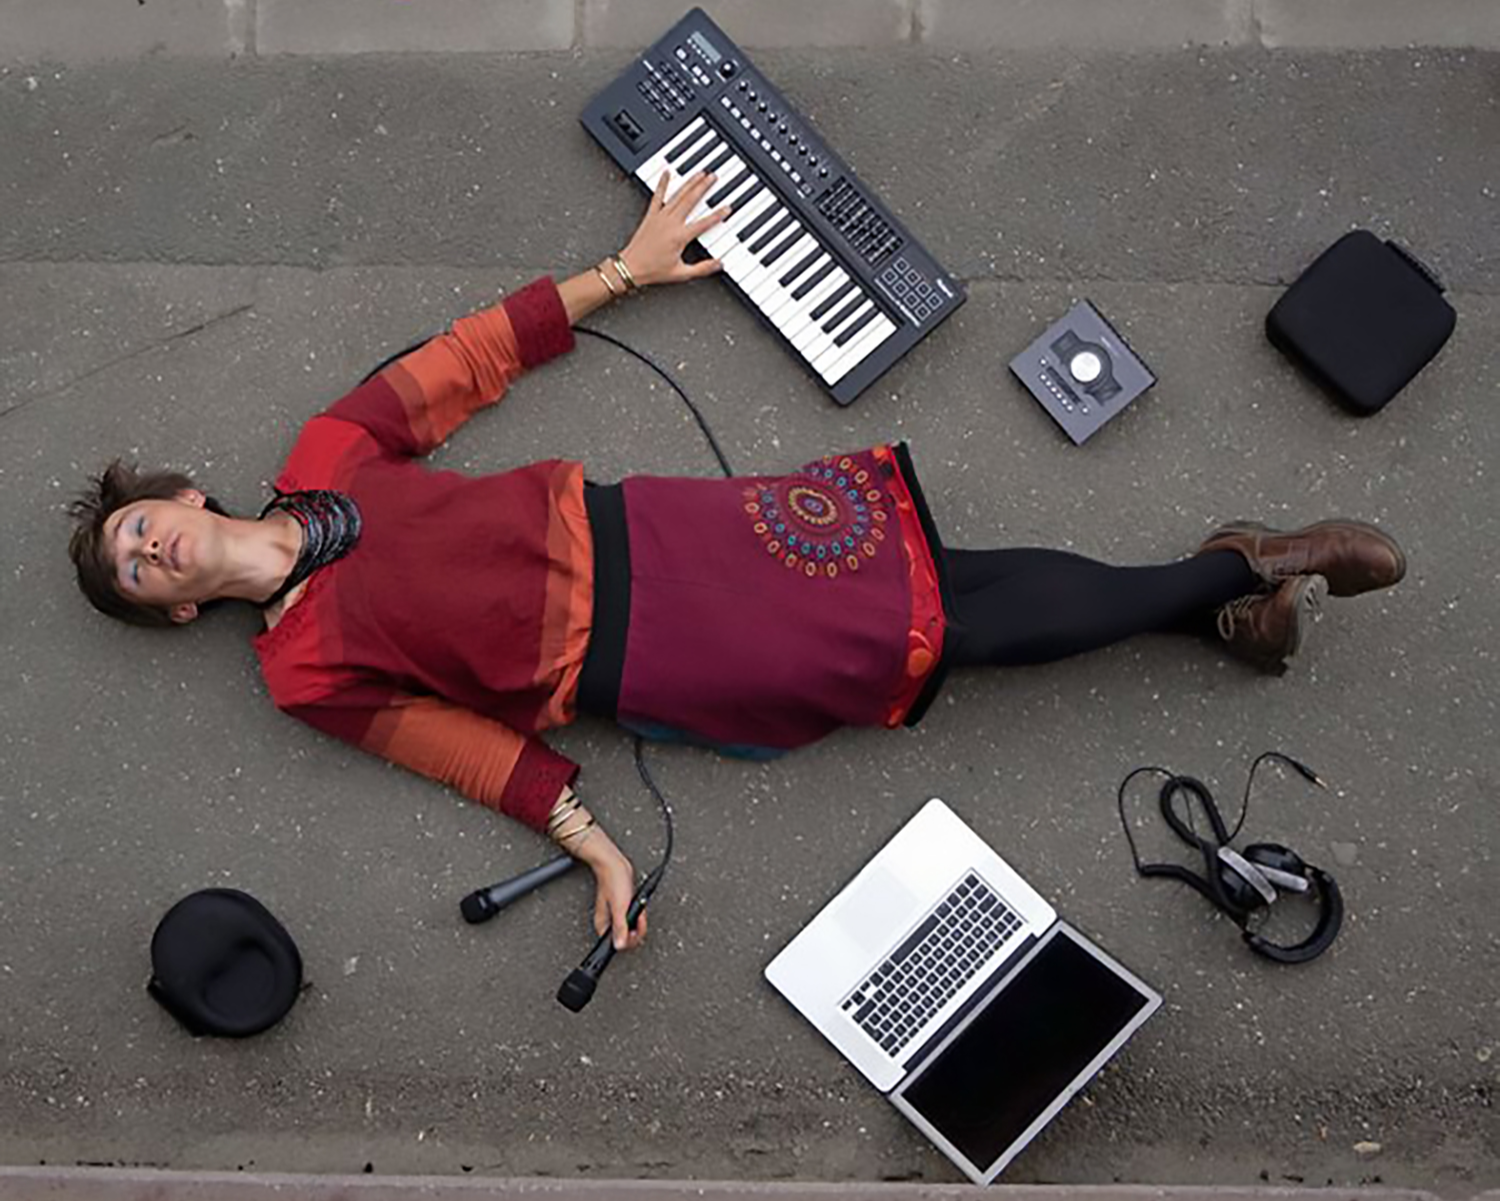 Photograph of a person laying down. Next to them is a keyboard, a laptop, and a microphone.